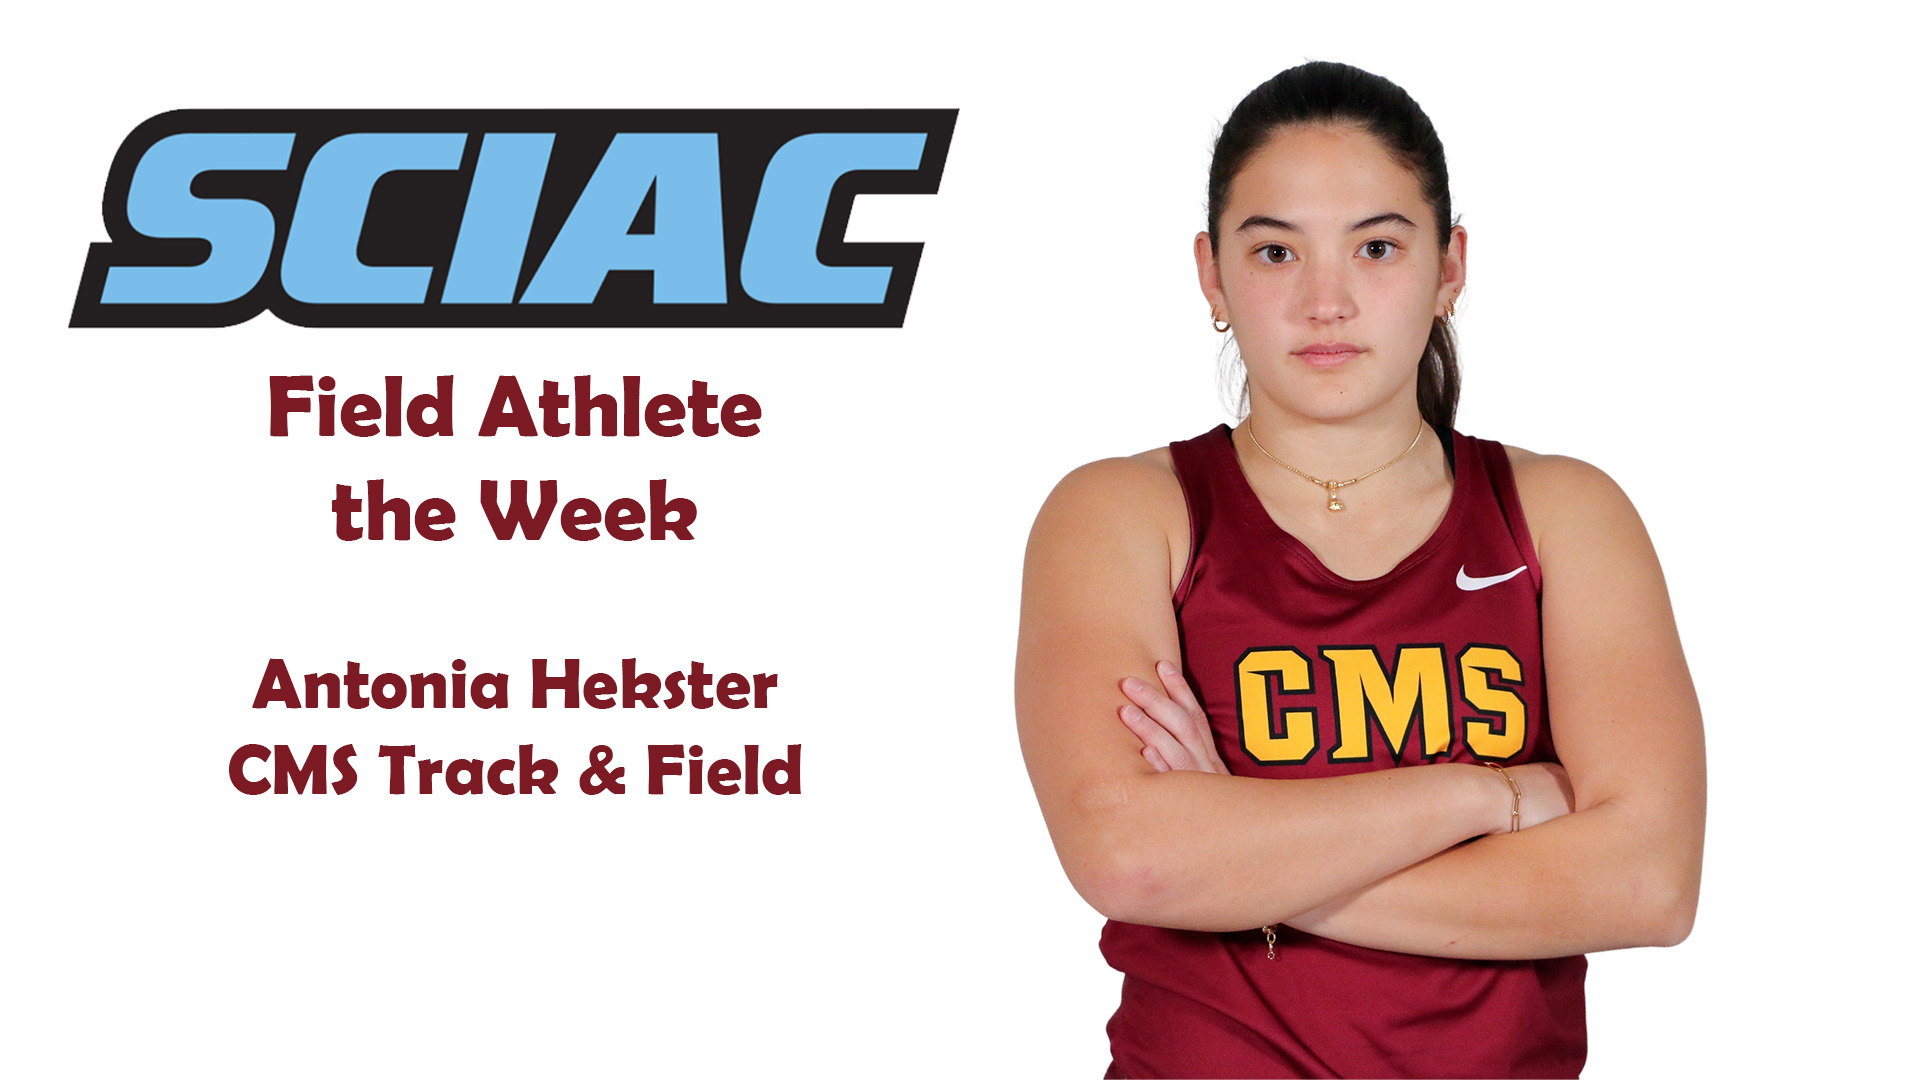 posed shot of Antonia Hekster with the SCIAC logo